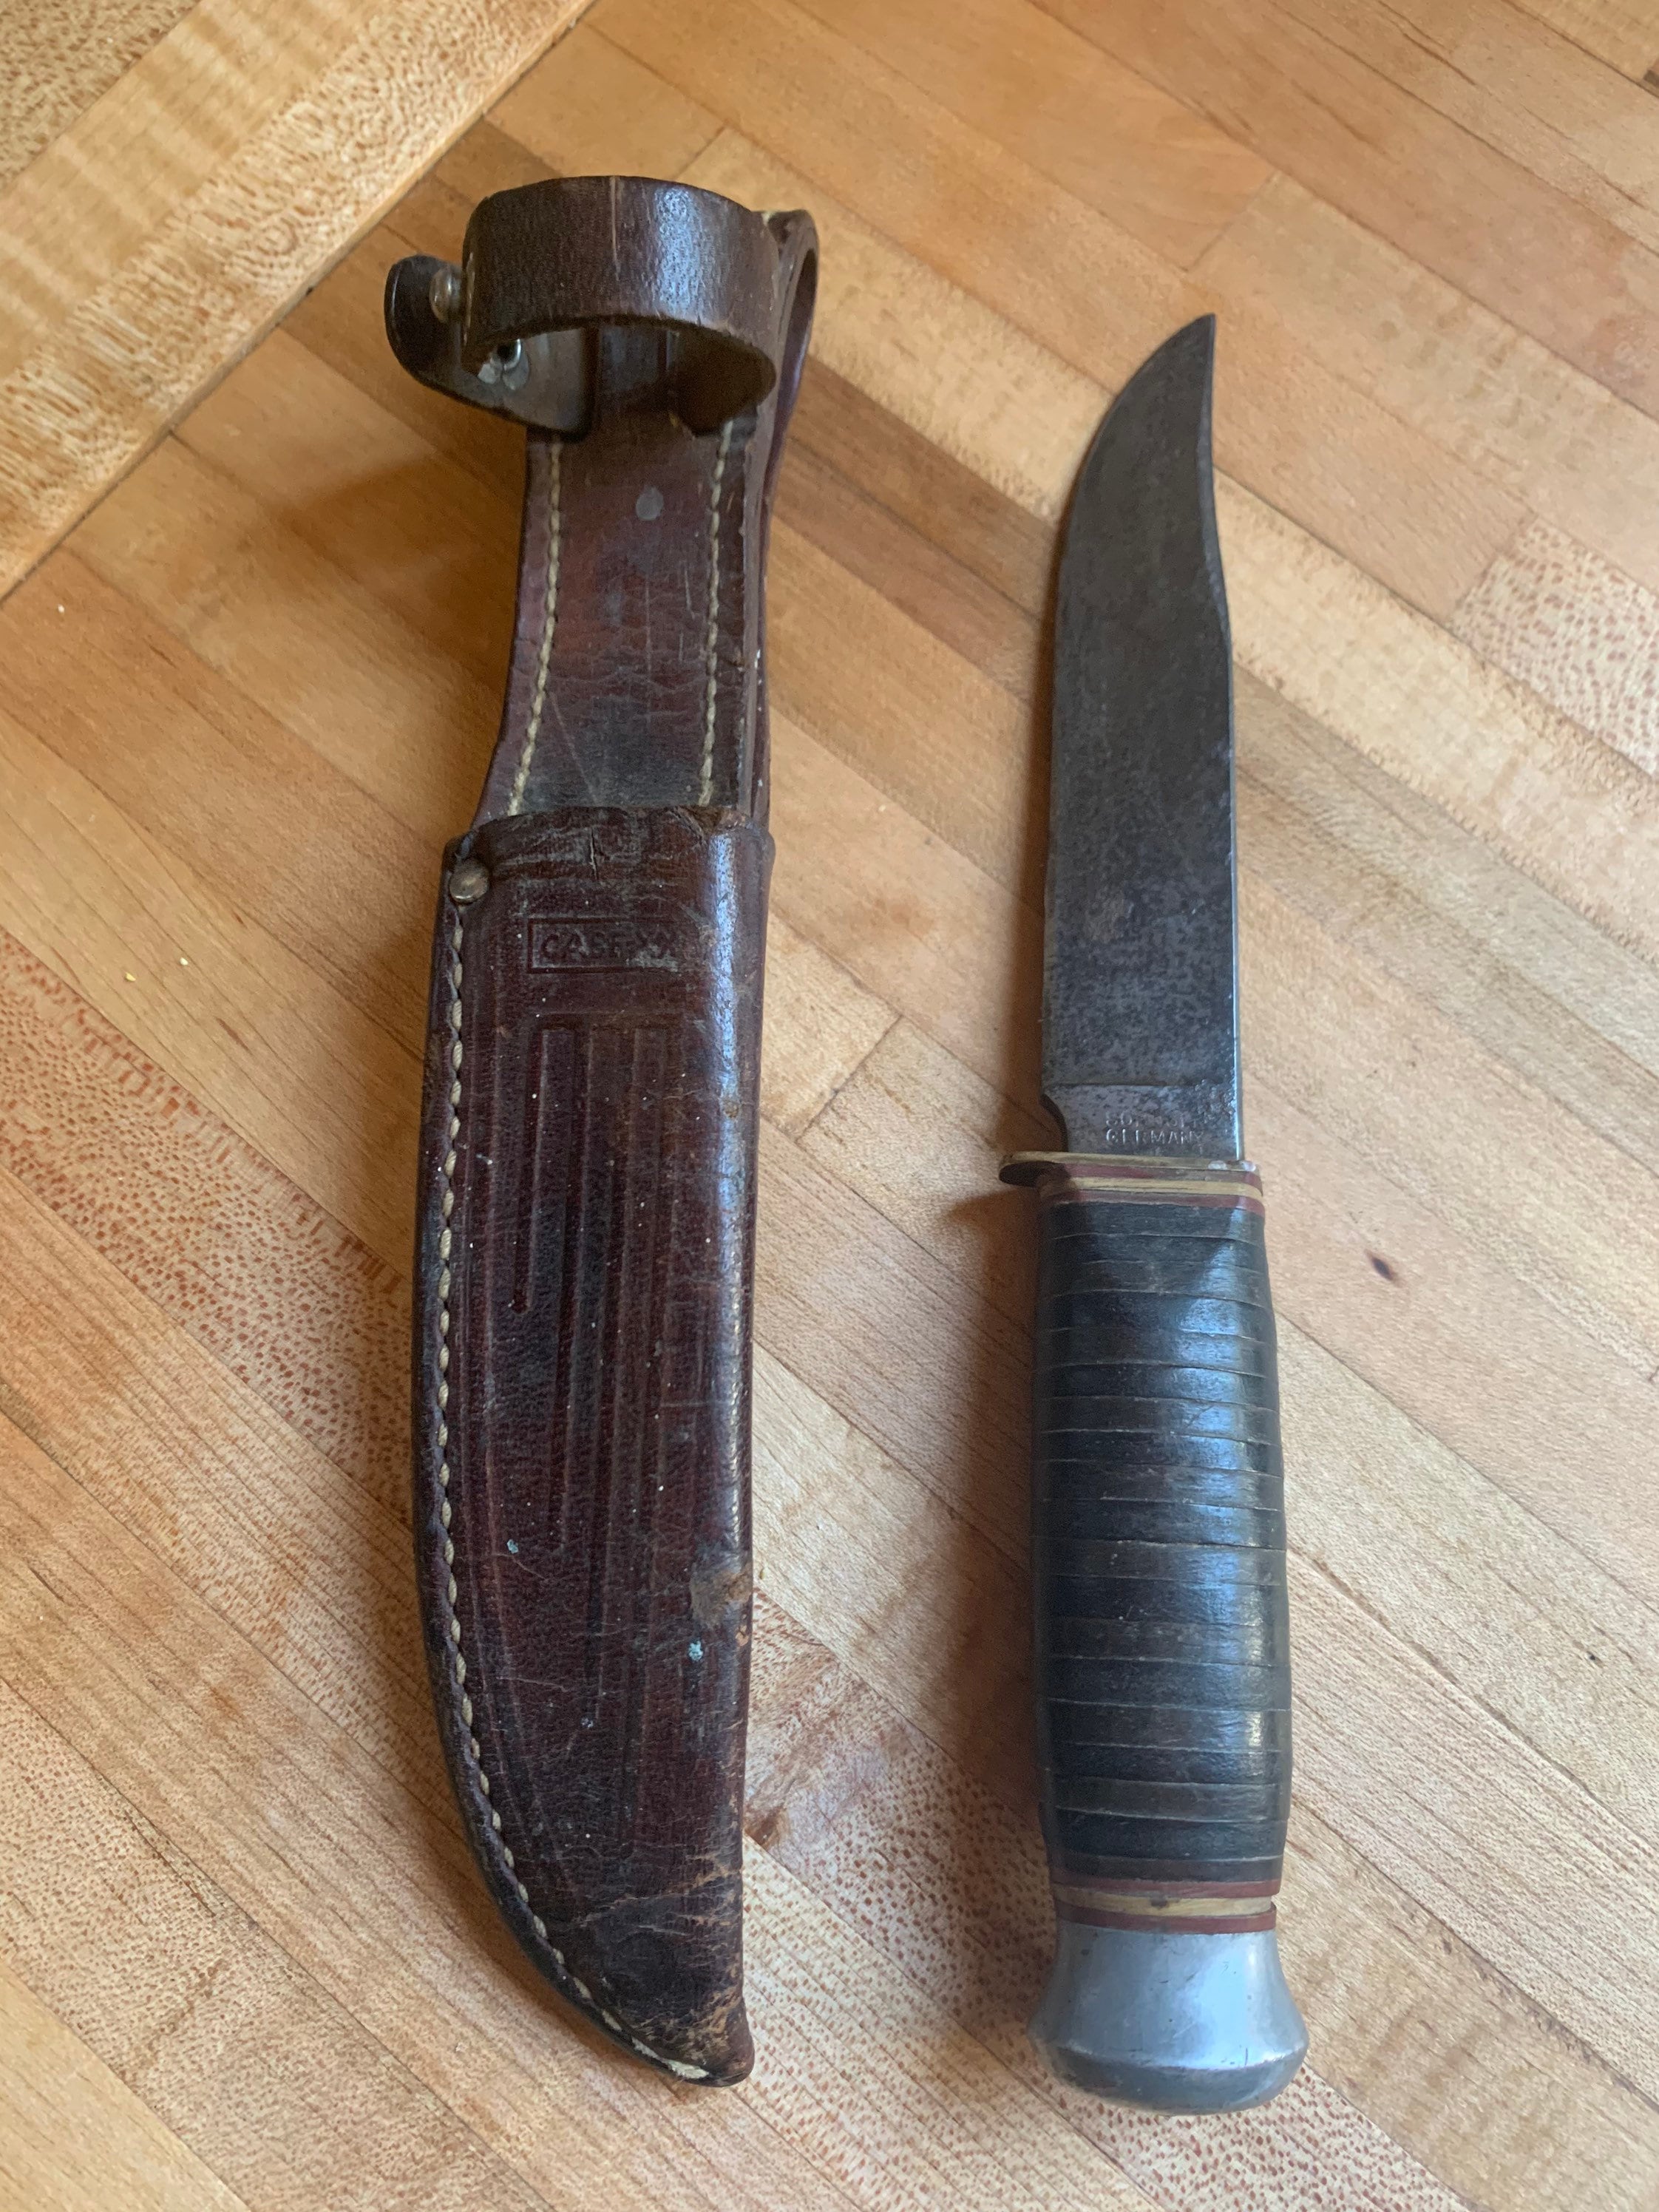 Help finding info on old German knife